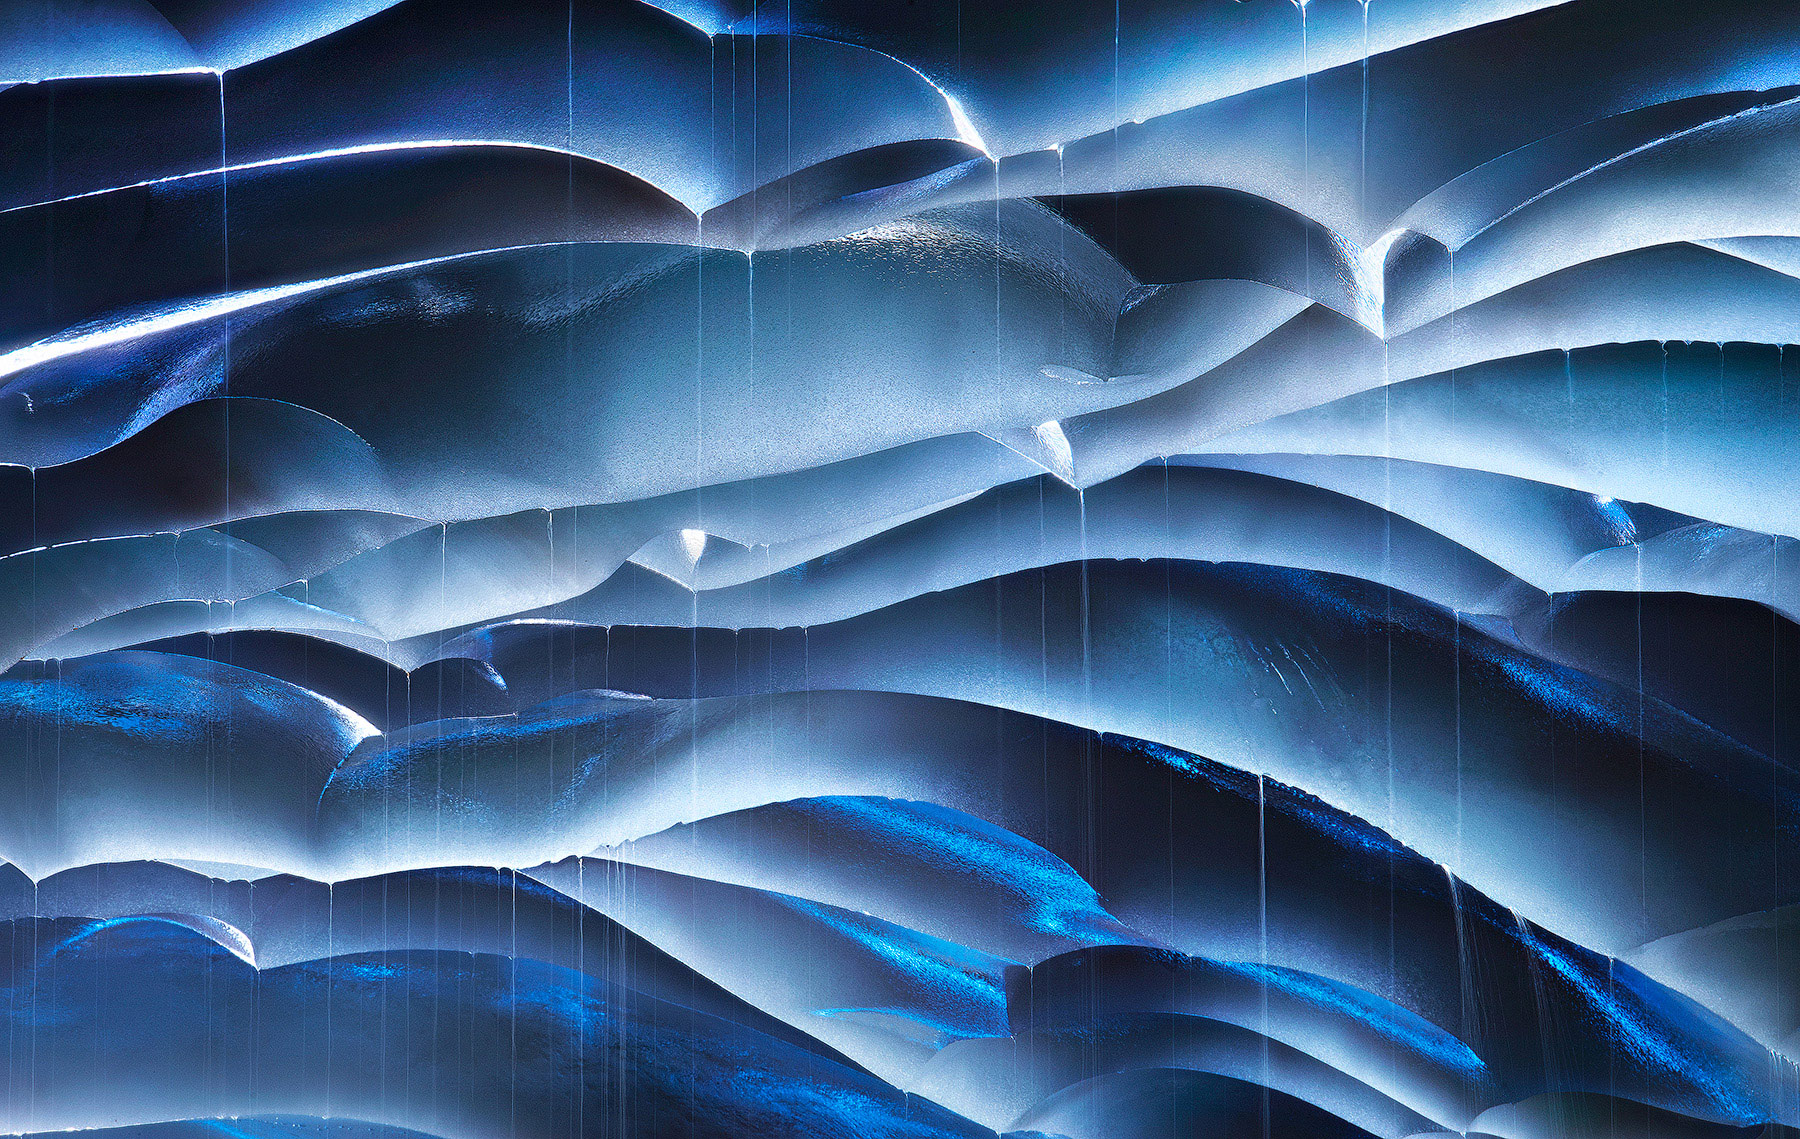 Compression from a 400mm lens creates an amazing abstract from these dripping layers inside an ice cave in Oregon's Three Sisters...